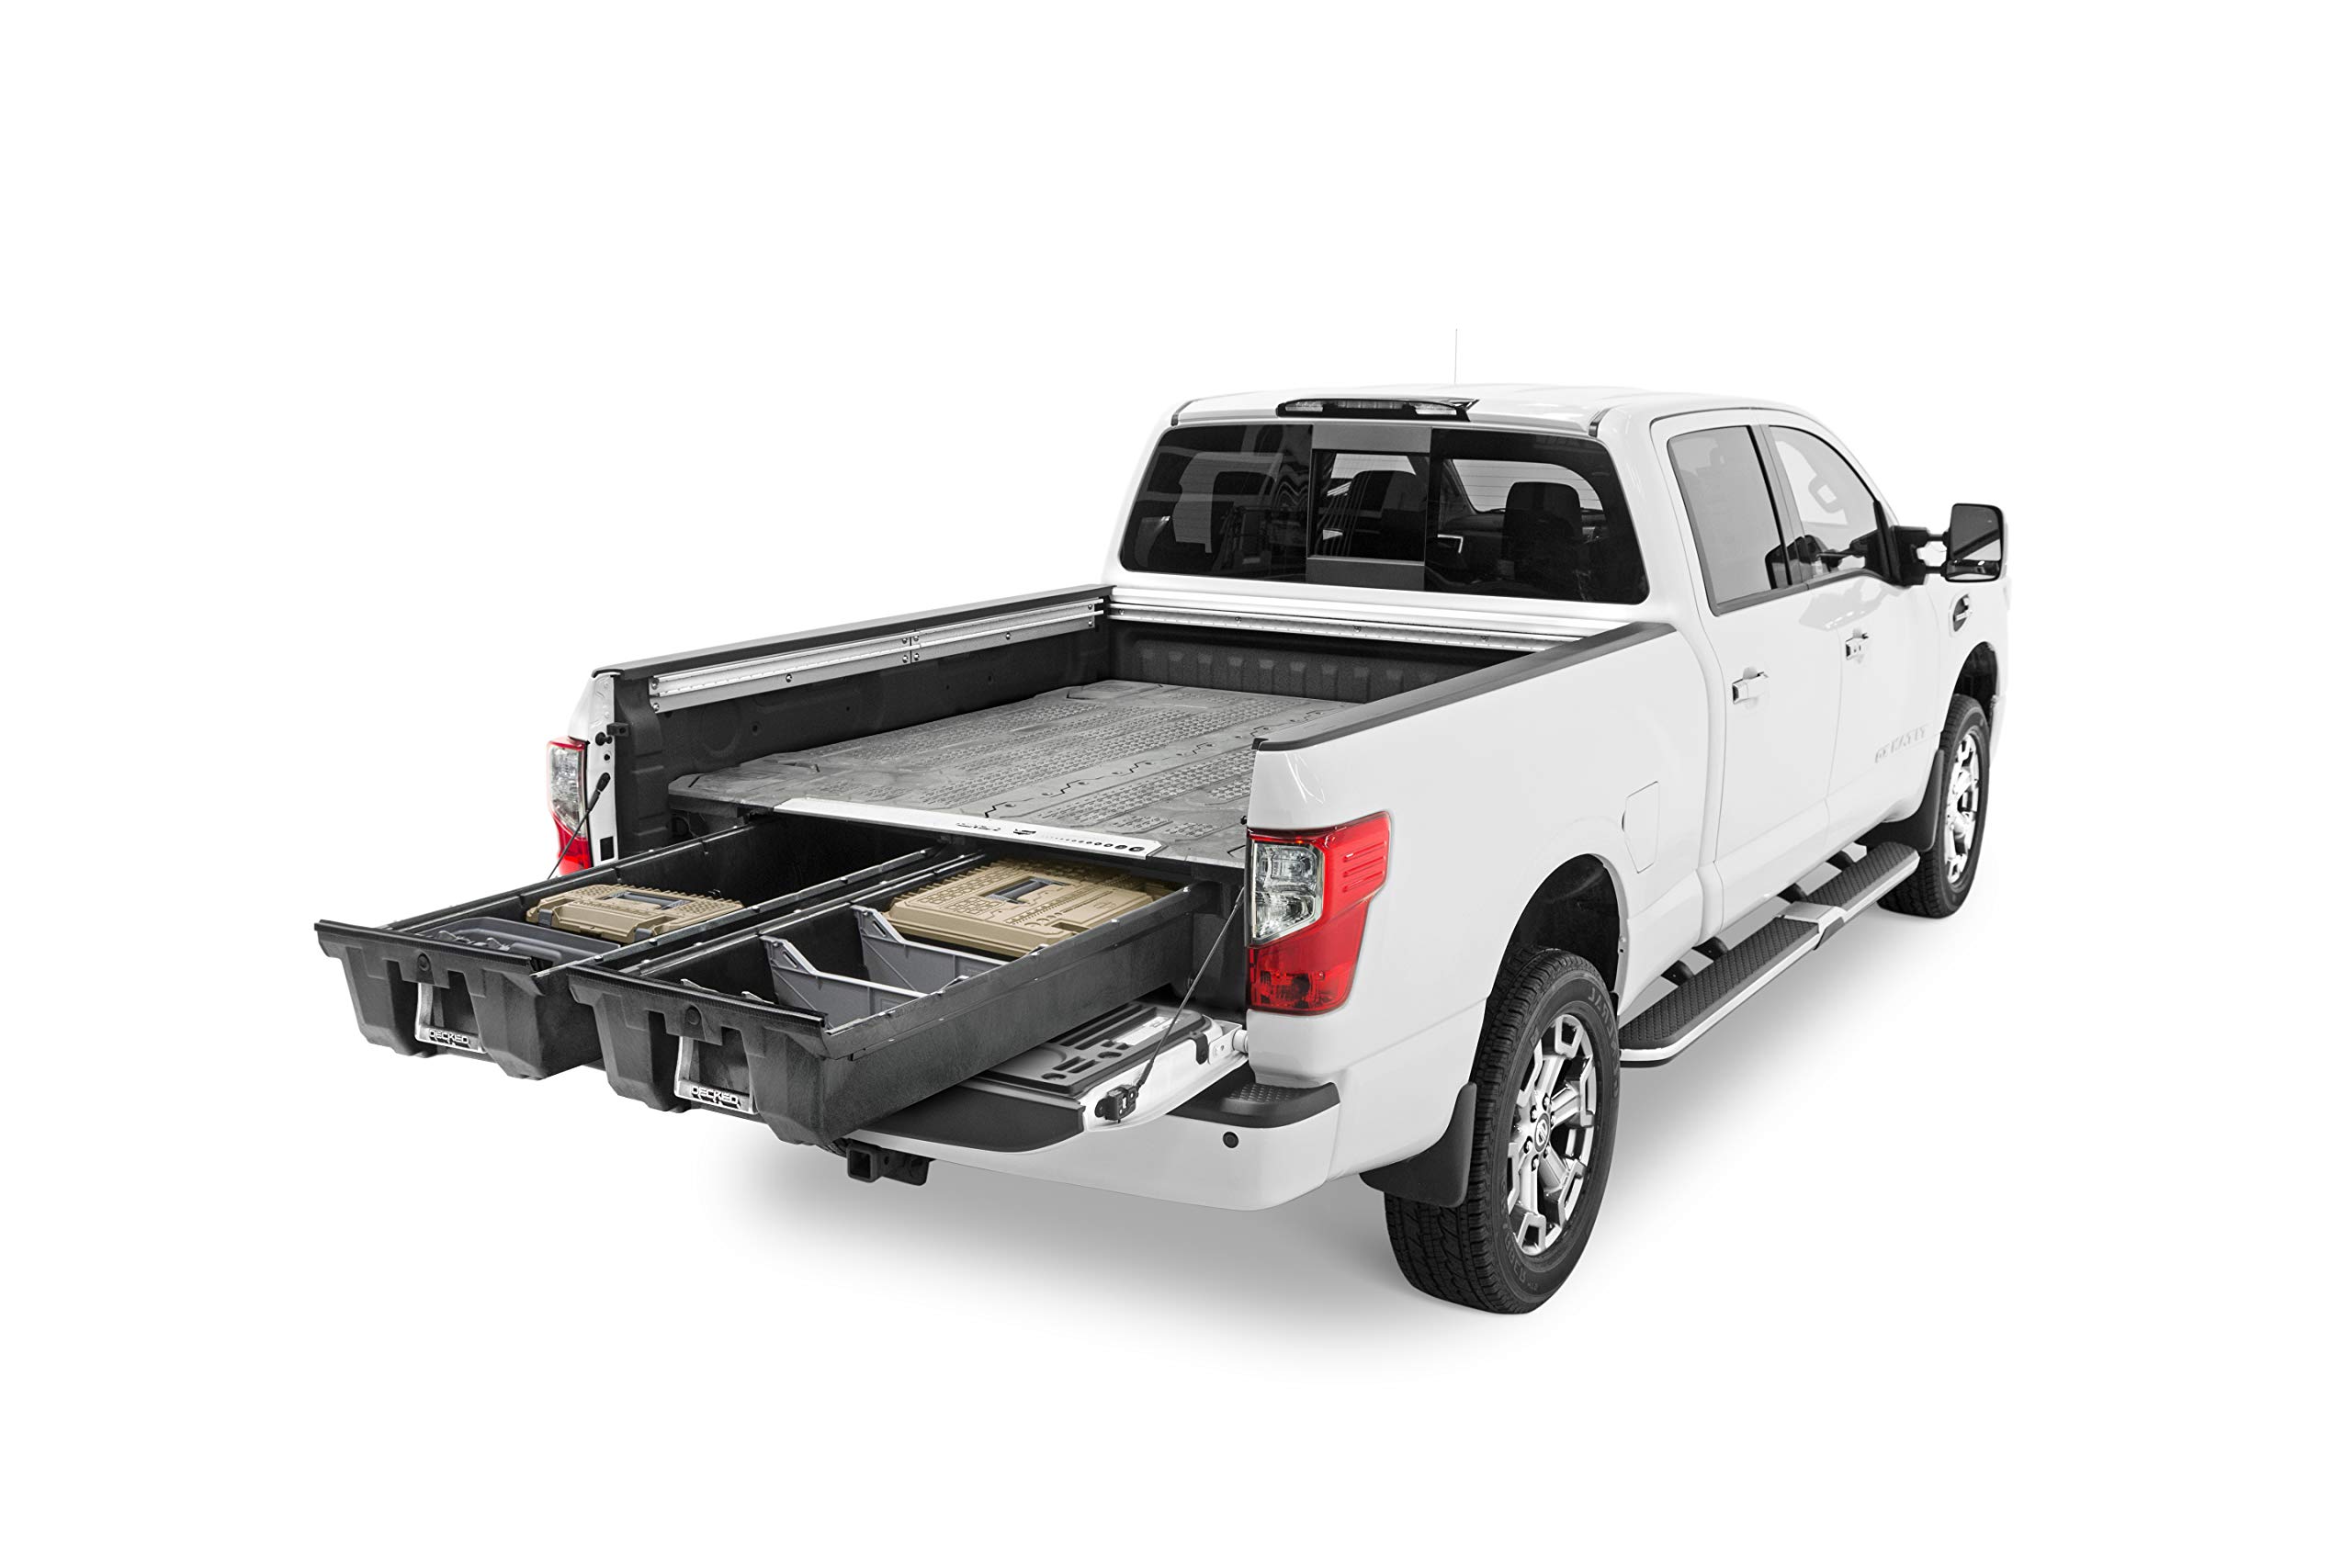 Amazon.com: DECKED Pickup Truck Storage System for Nissan Titan (2004-2015)  5' 7" Bed Length Includes System Accessories : Automotive